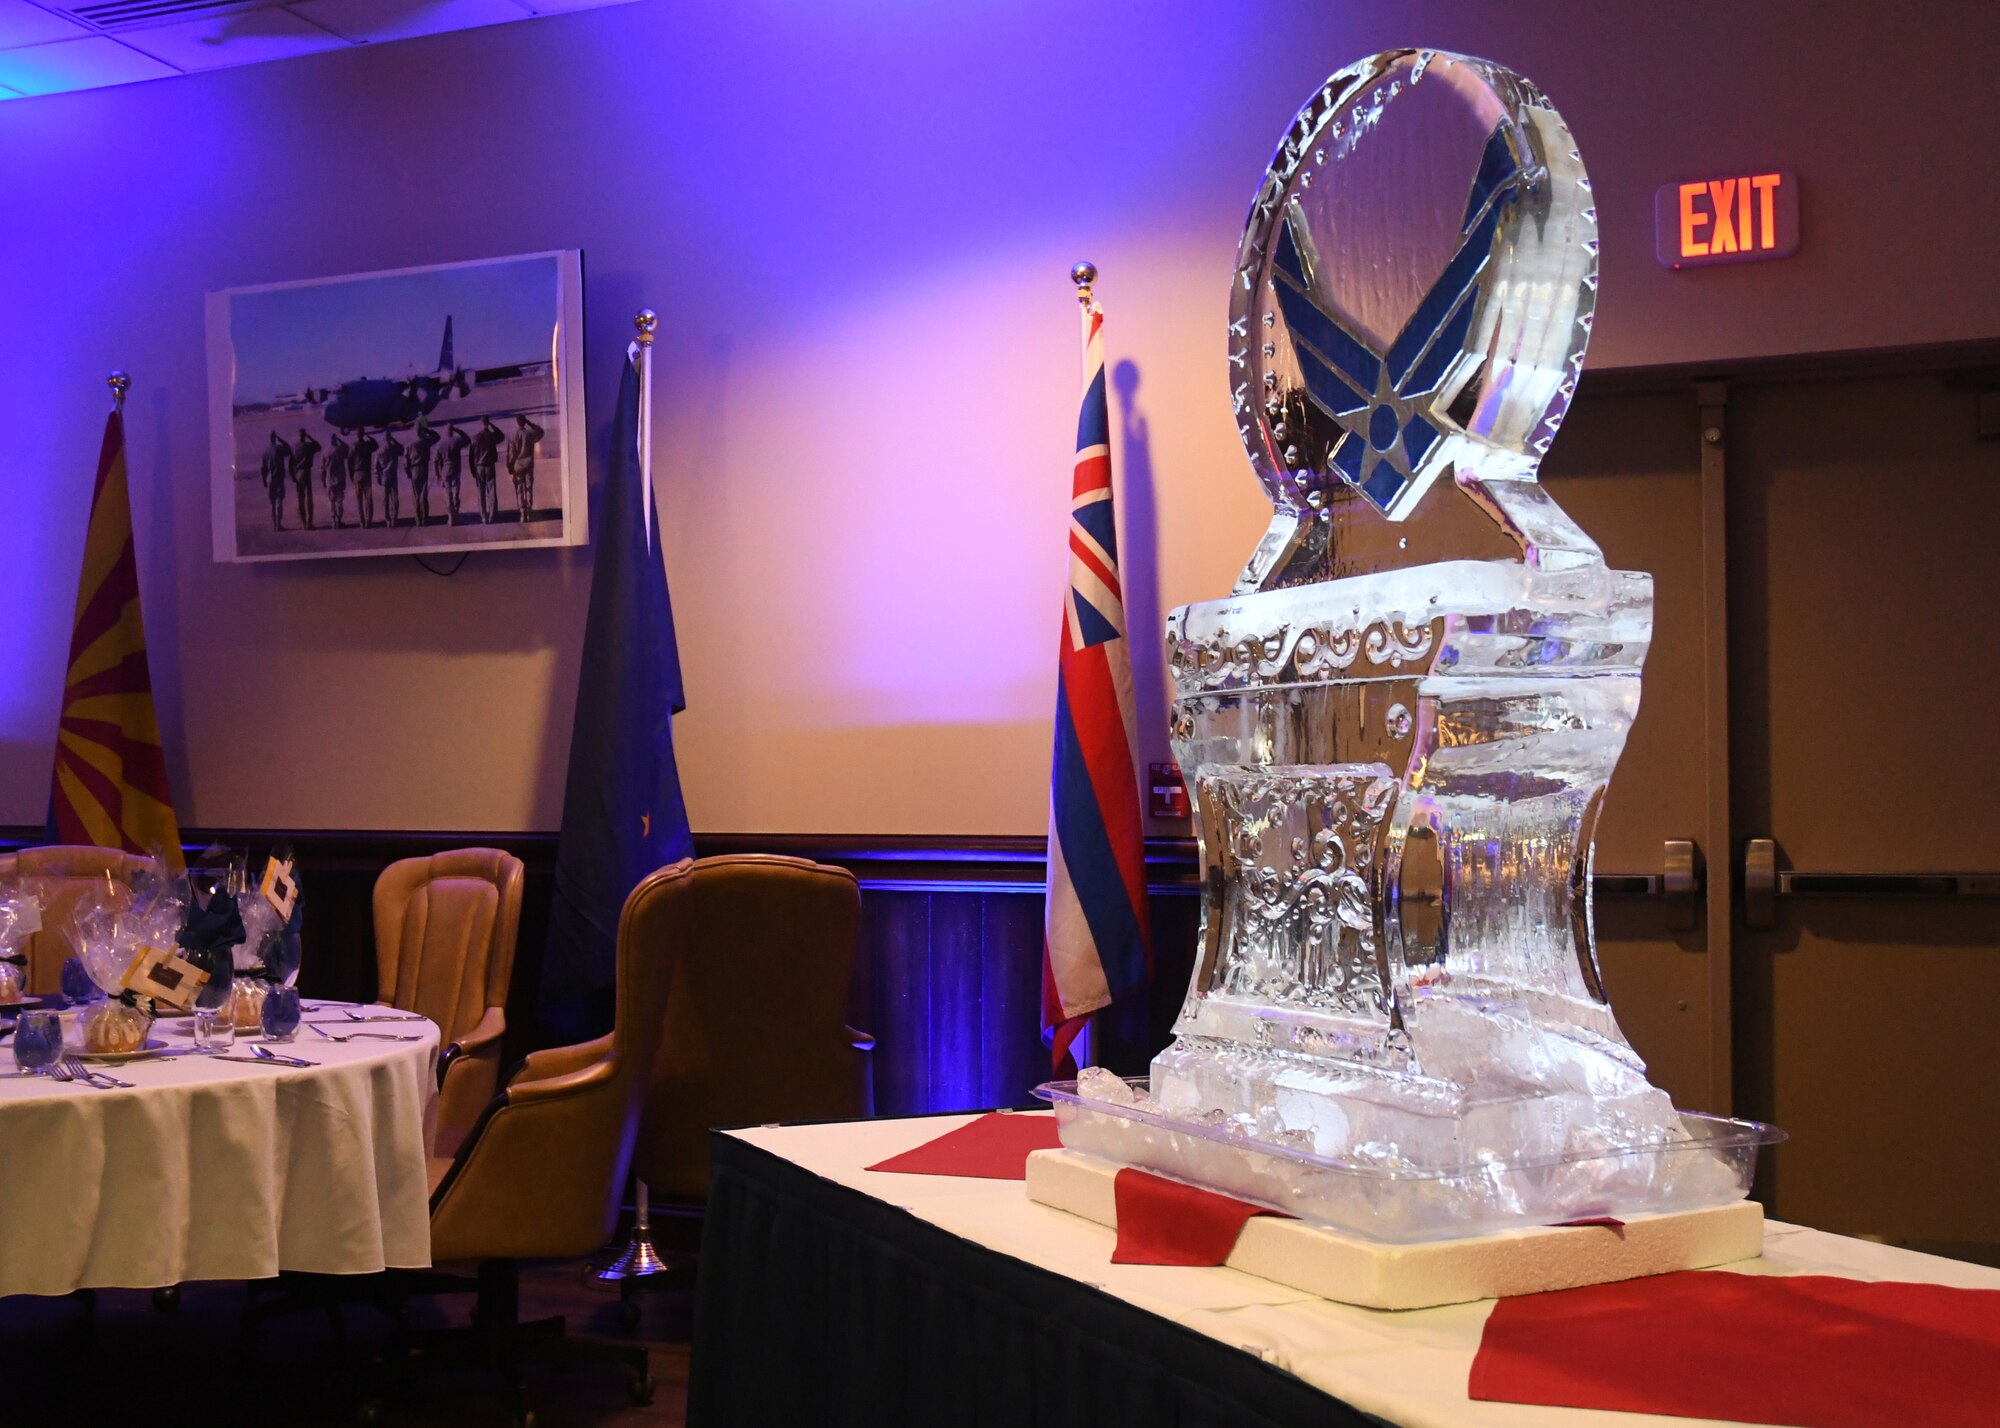 An ice sculpture rests, depicting the Air Force logo, at the Air Force Ball at Dobbins Air Reserve Base, Ga, Sept. 8, 2018. The 94th Airlift Wing hosted an Air Force Ball at Dobbins ARB, and invited Col. Wayne Waddell, United States Air Force retired, as a guest speaker. Waddell served in the Vietnam war, and was a prisoner of war for 6 years. (U.S. Air Force Photo by Staff Sgt. Miles Wilson)